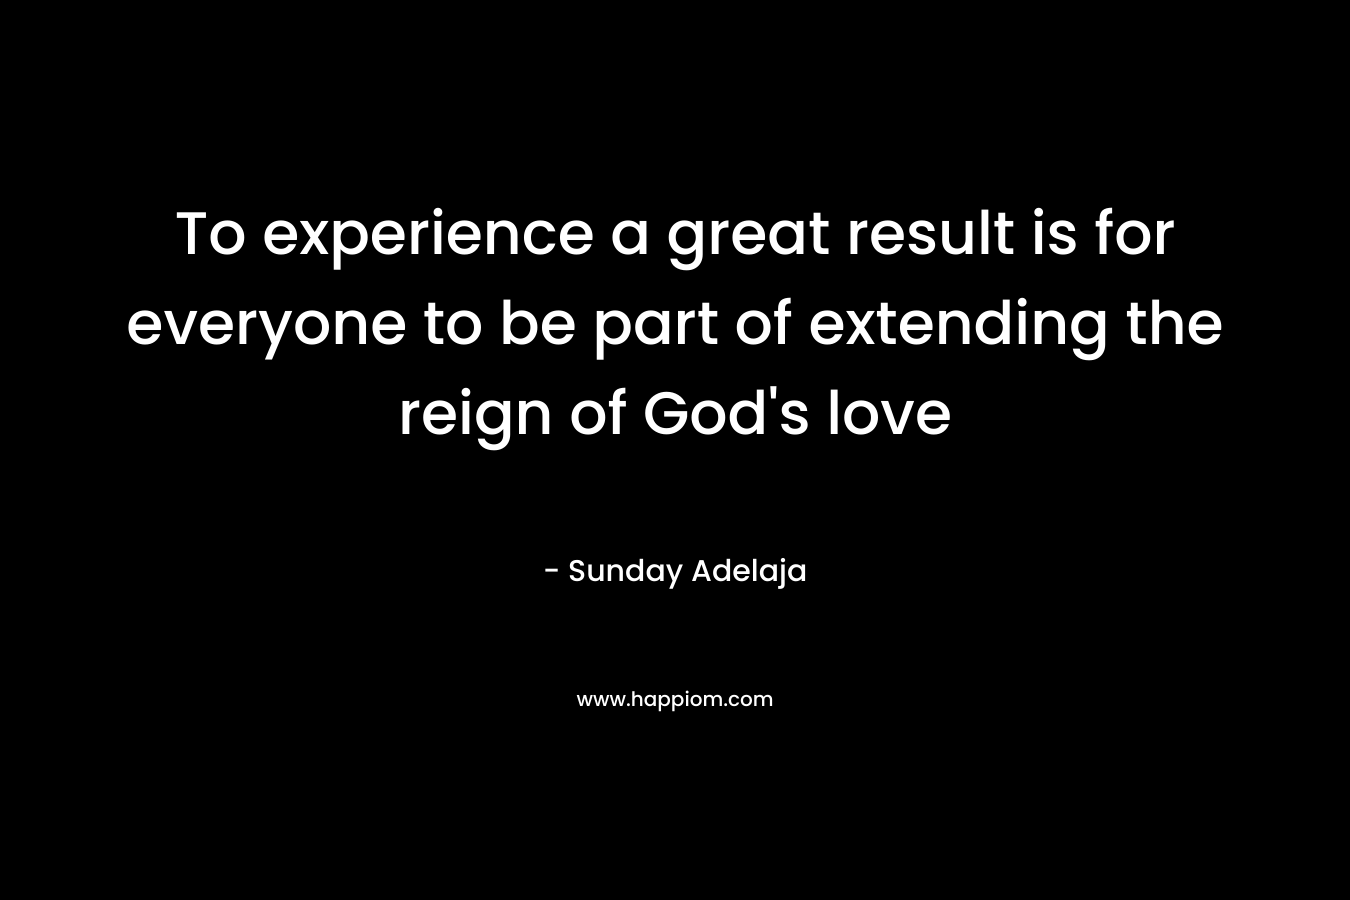 To experience a great result is for everyone to be part of extending the reign of God’s love – Sunday Adelaja